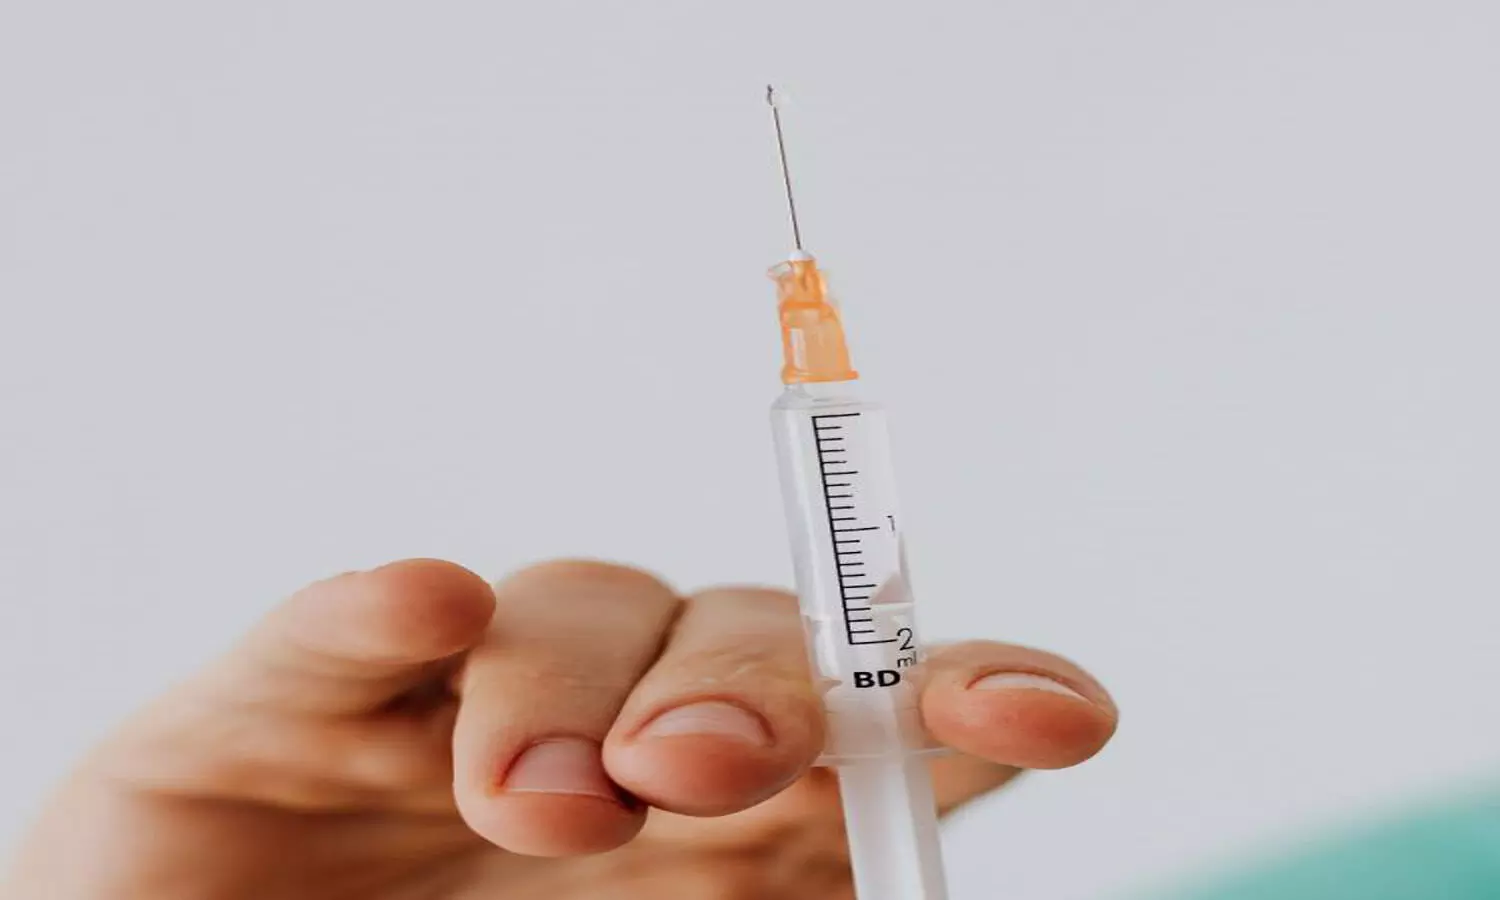 Covid-19 Vaccine: Booster dose will be given in Brazil, Germany